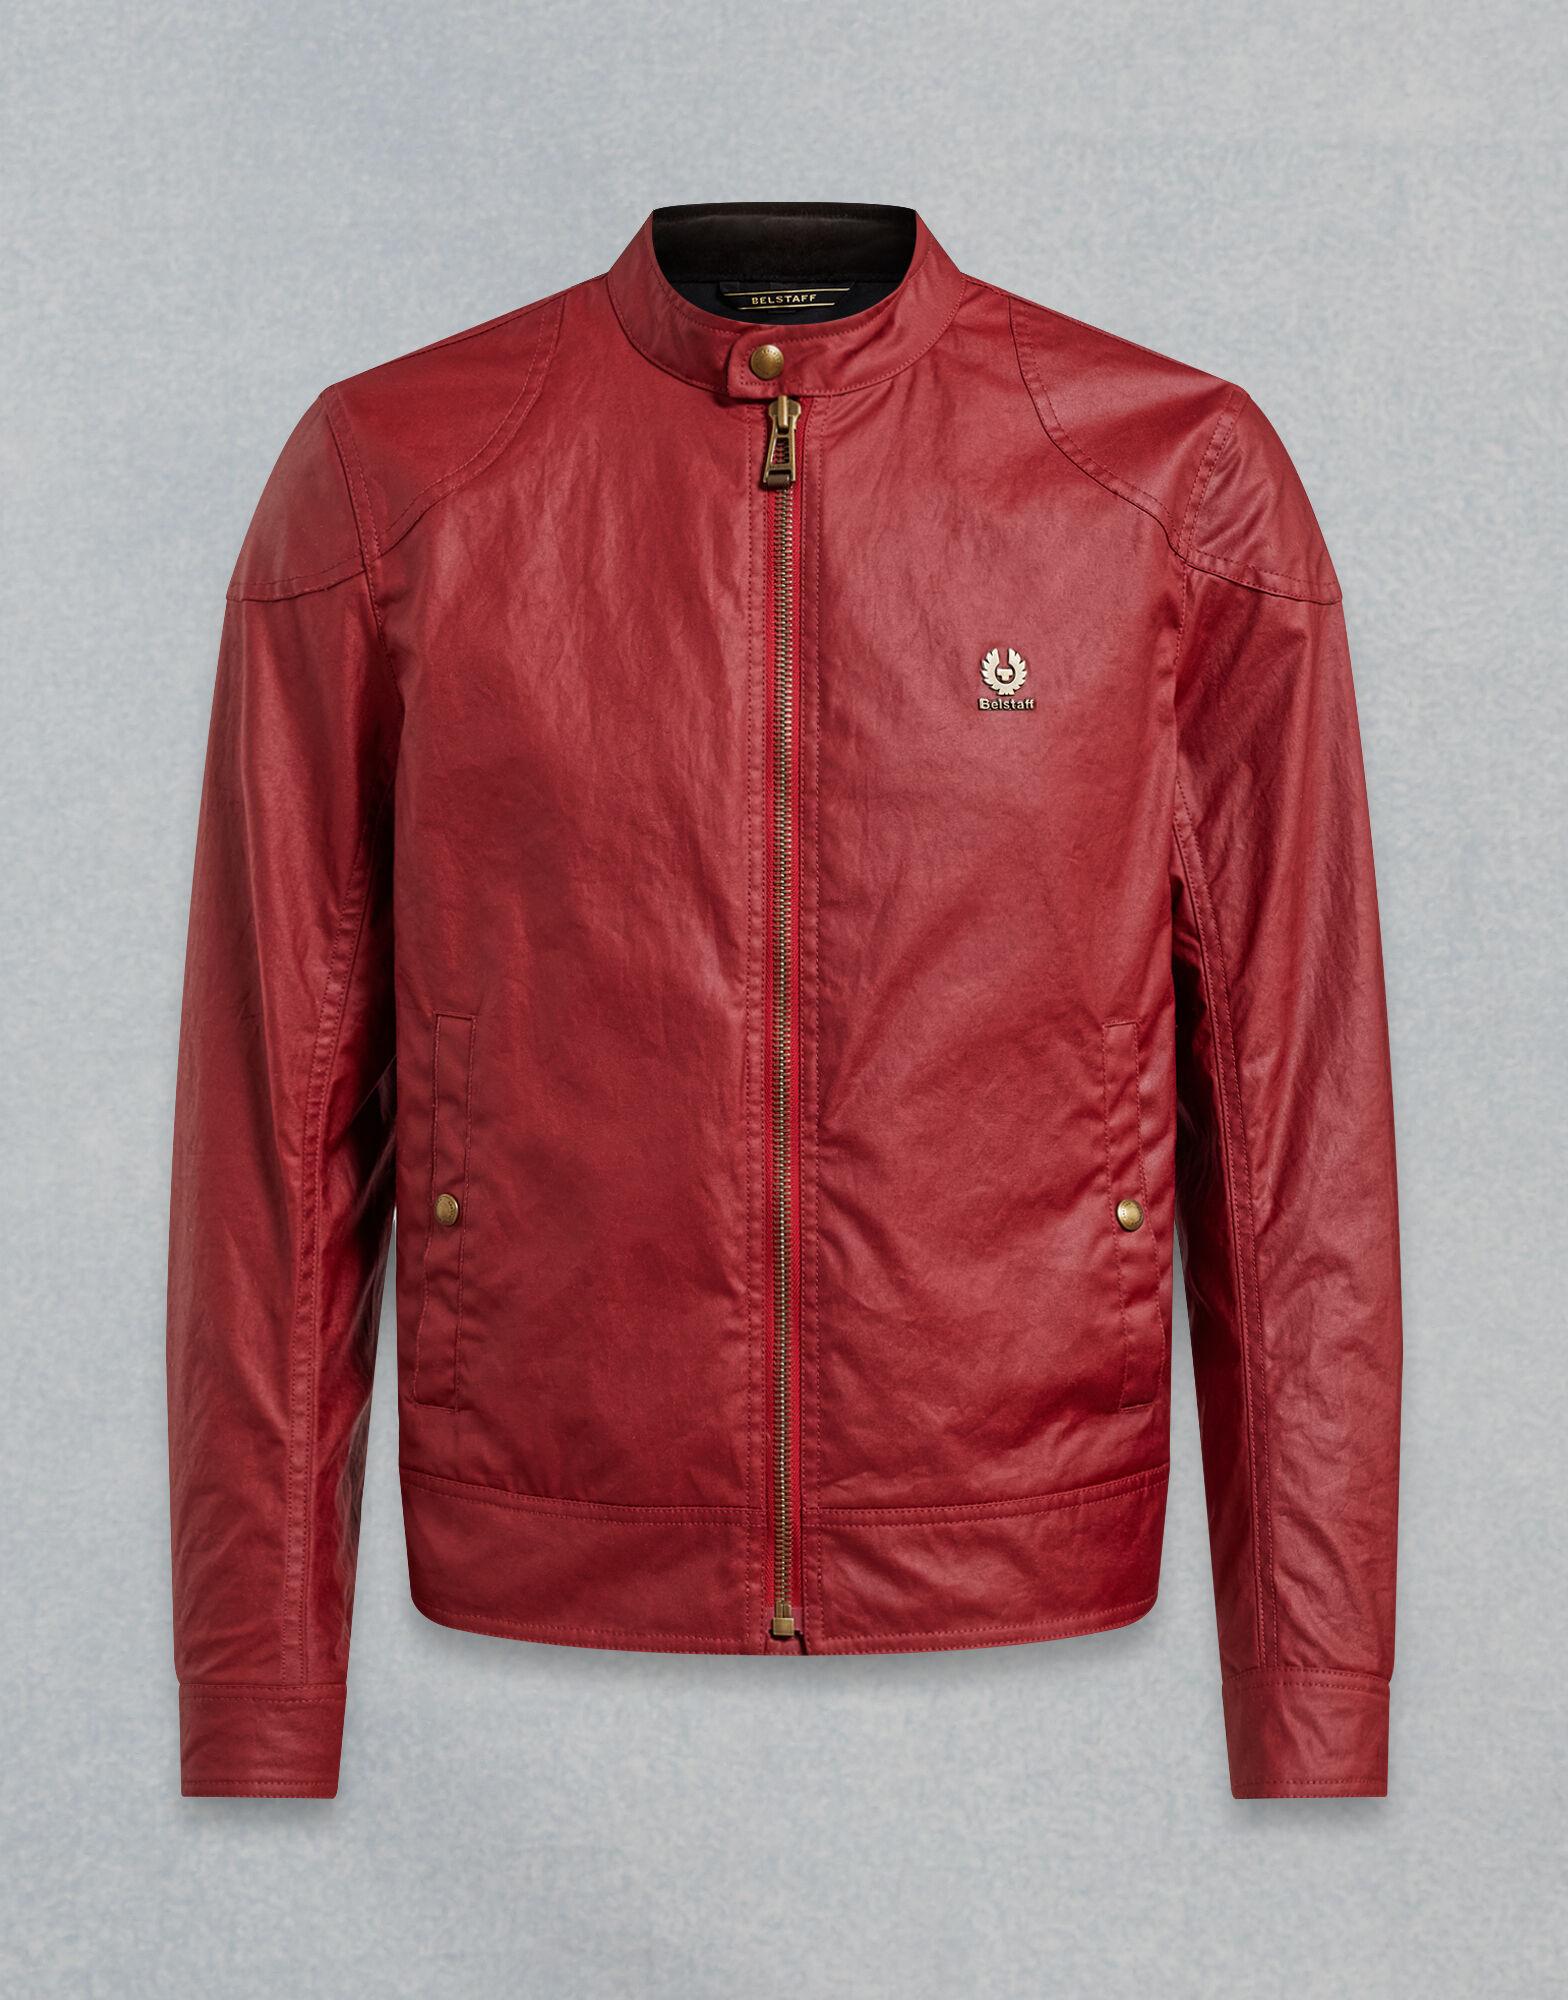 Belstaff Cotton Kelland Waxed Jacket in Racing Red (Red) for Men - Lyst